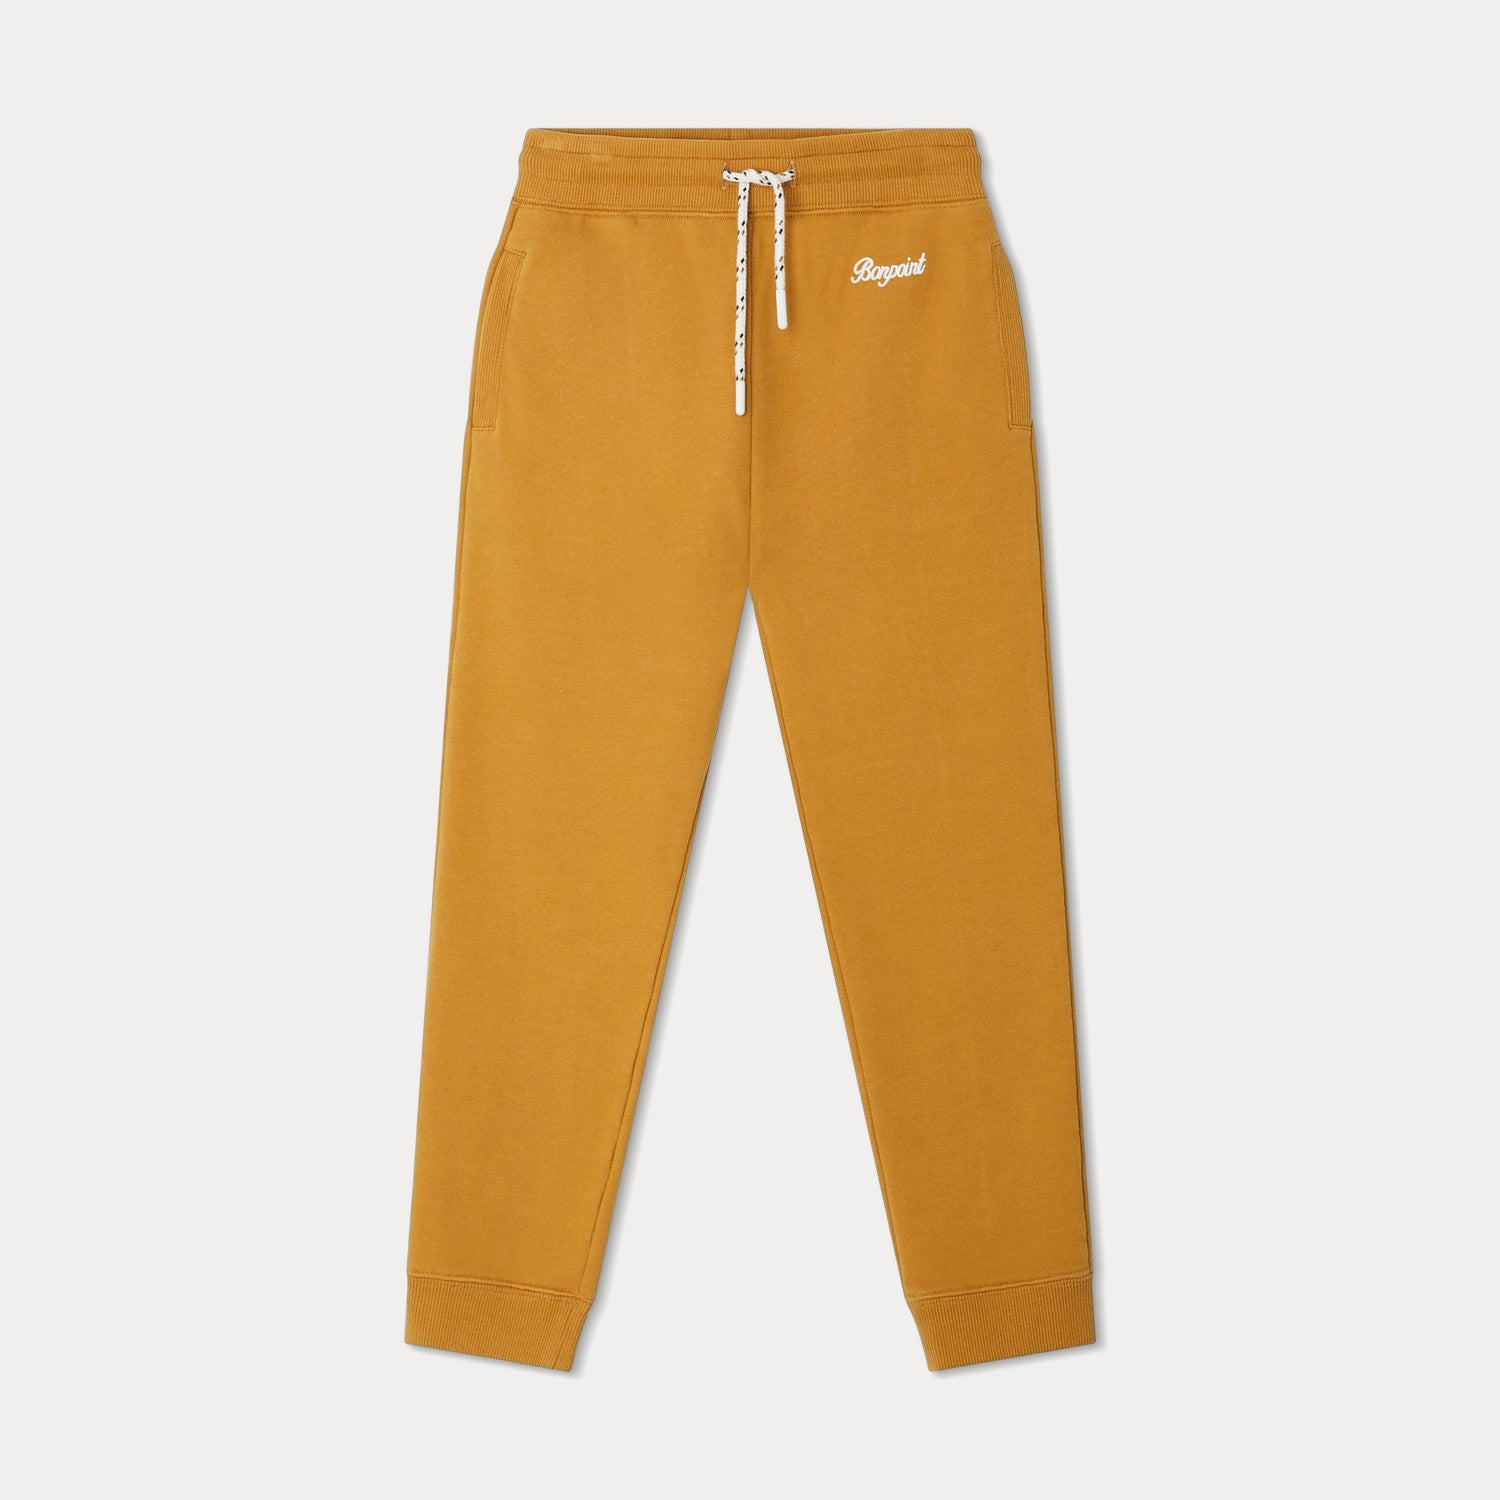 Boys Gold Cotton Trousers